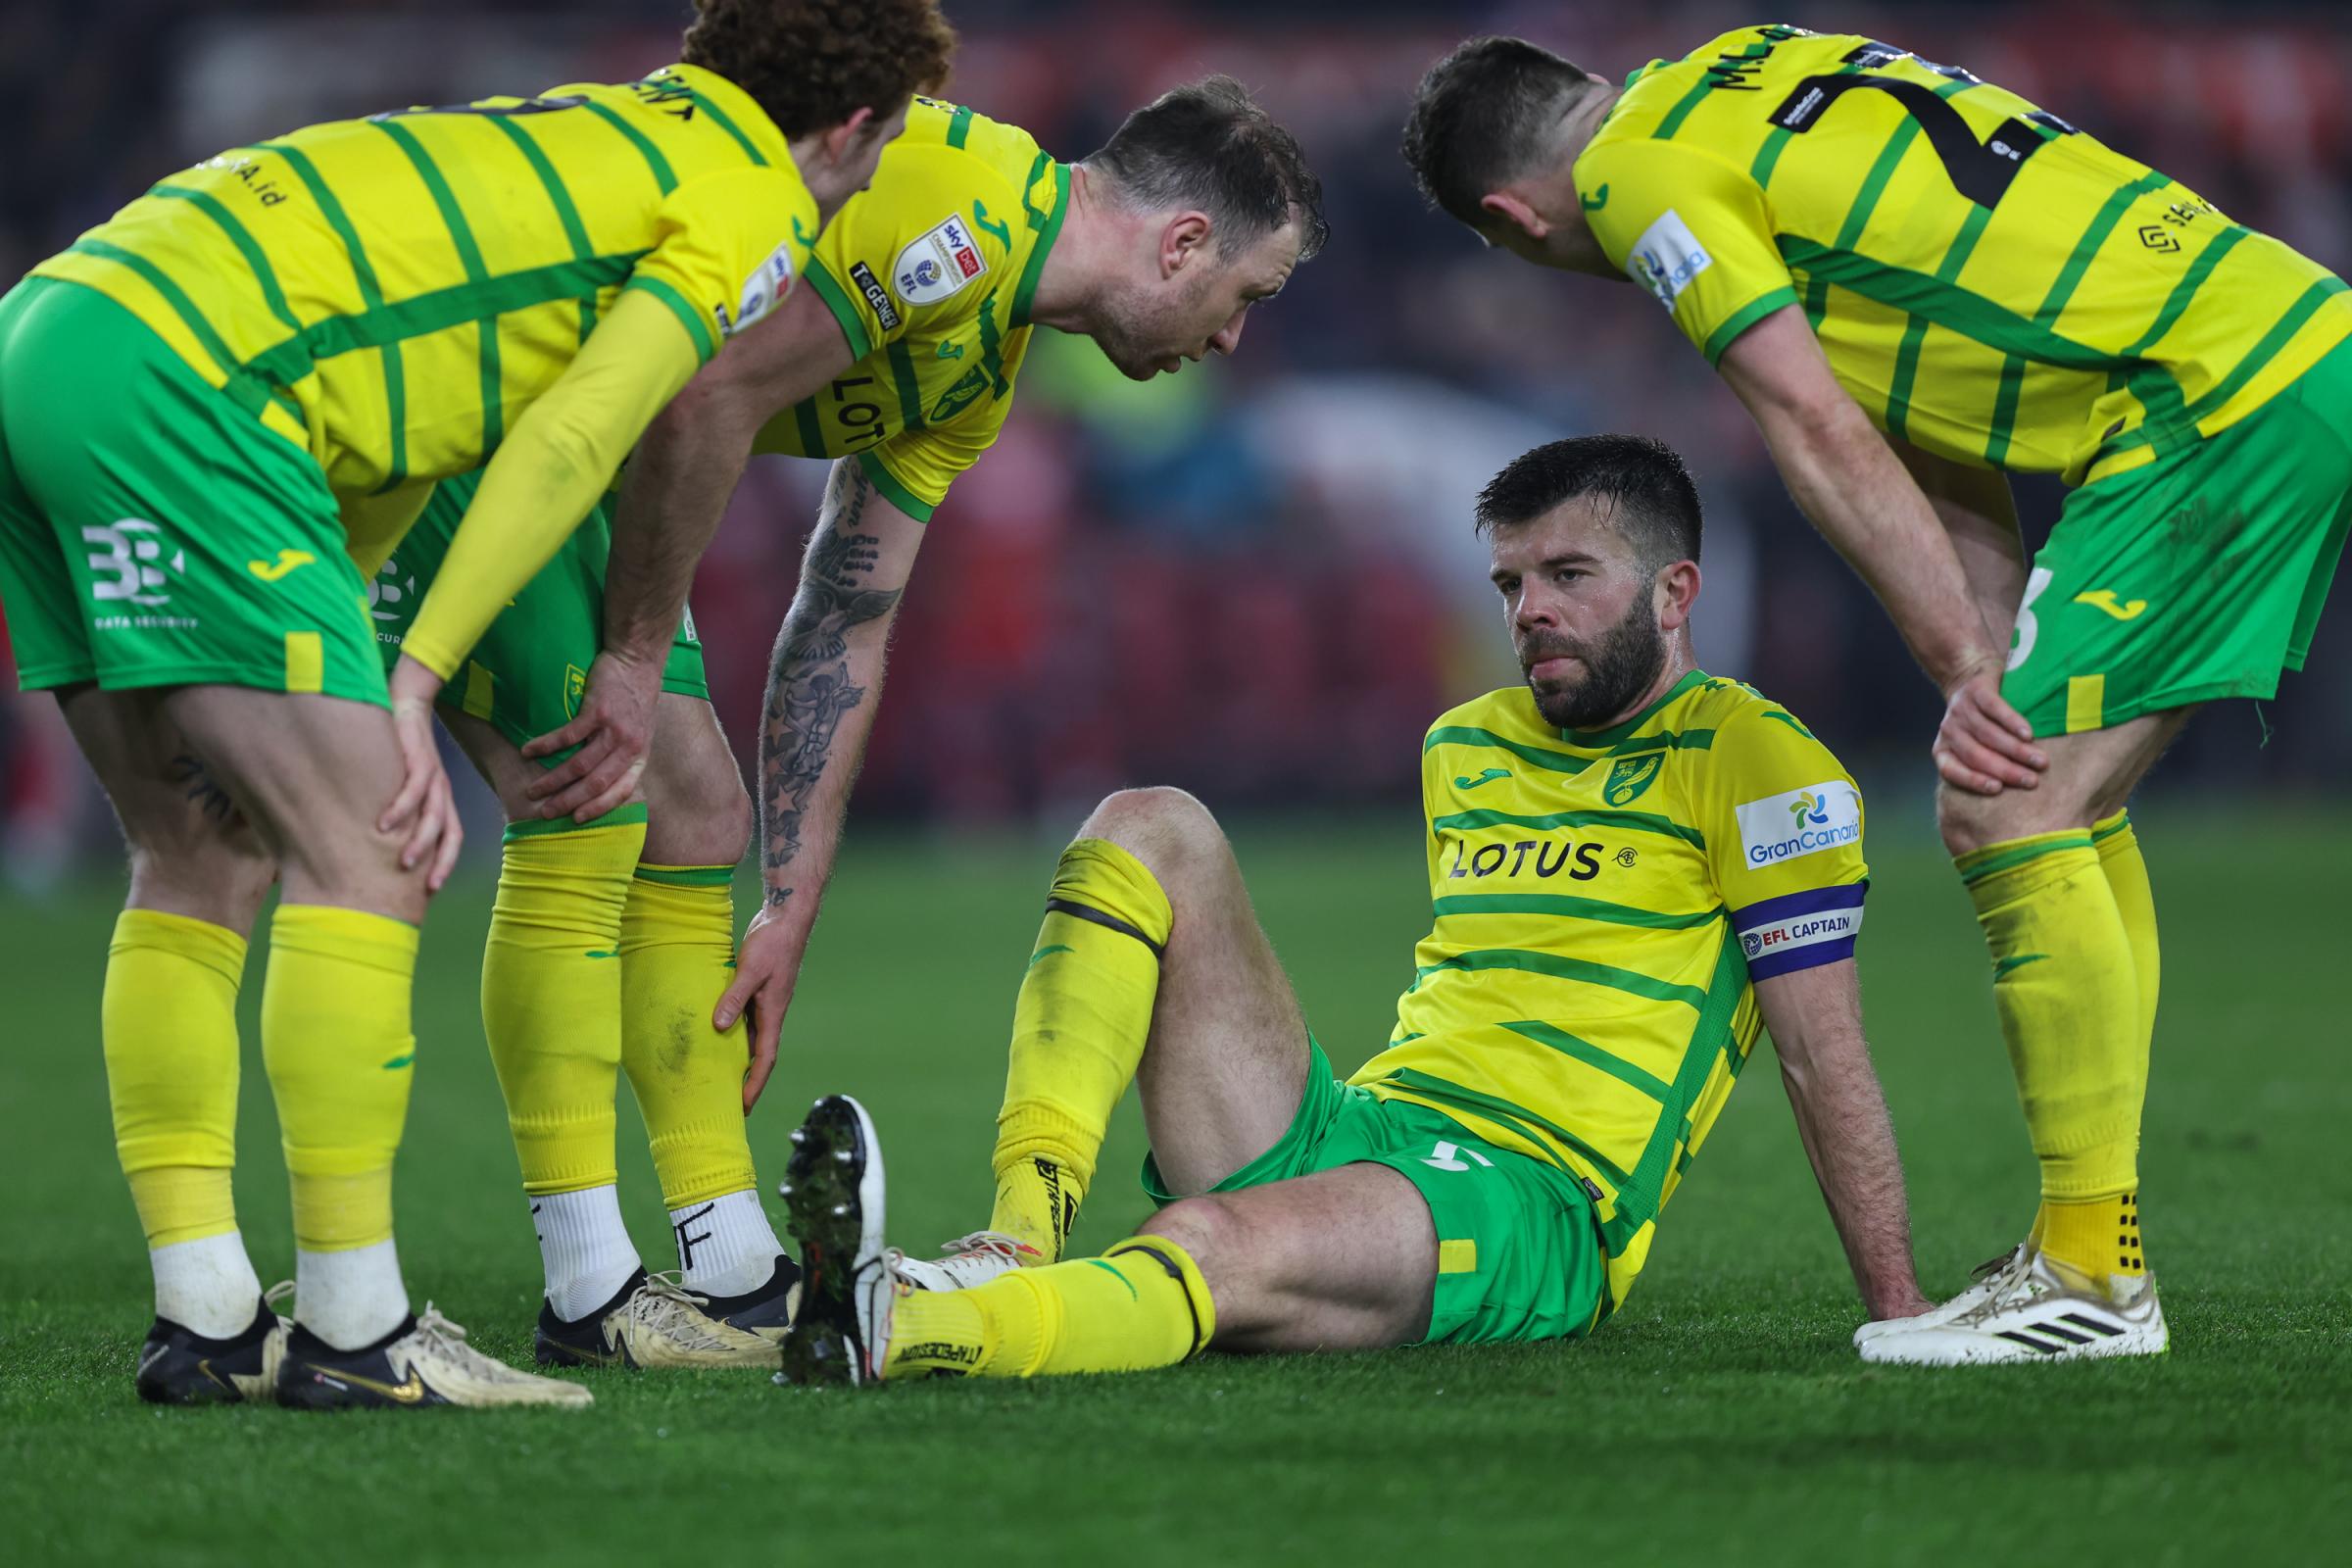 Norwich City's Grant Hanley Scotland withdrawal confirmed | The Pink Un